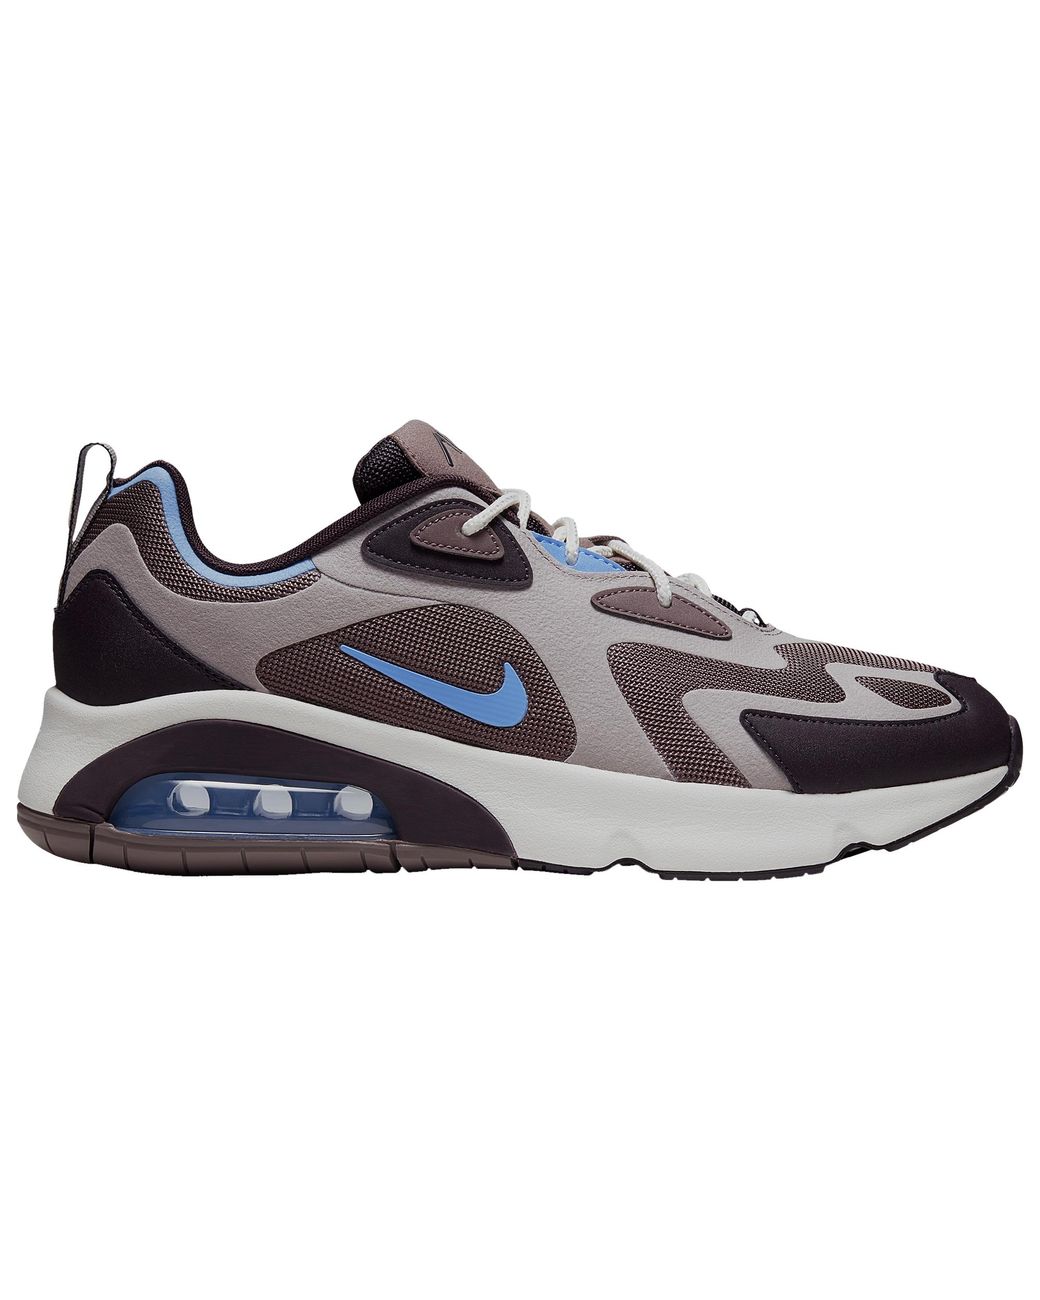 eastbay shoes nike air max